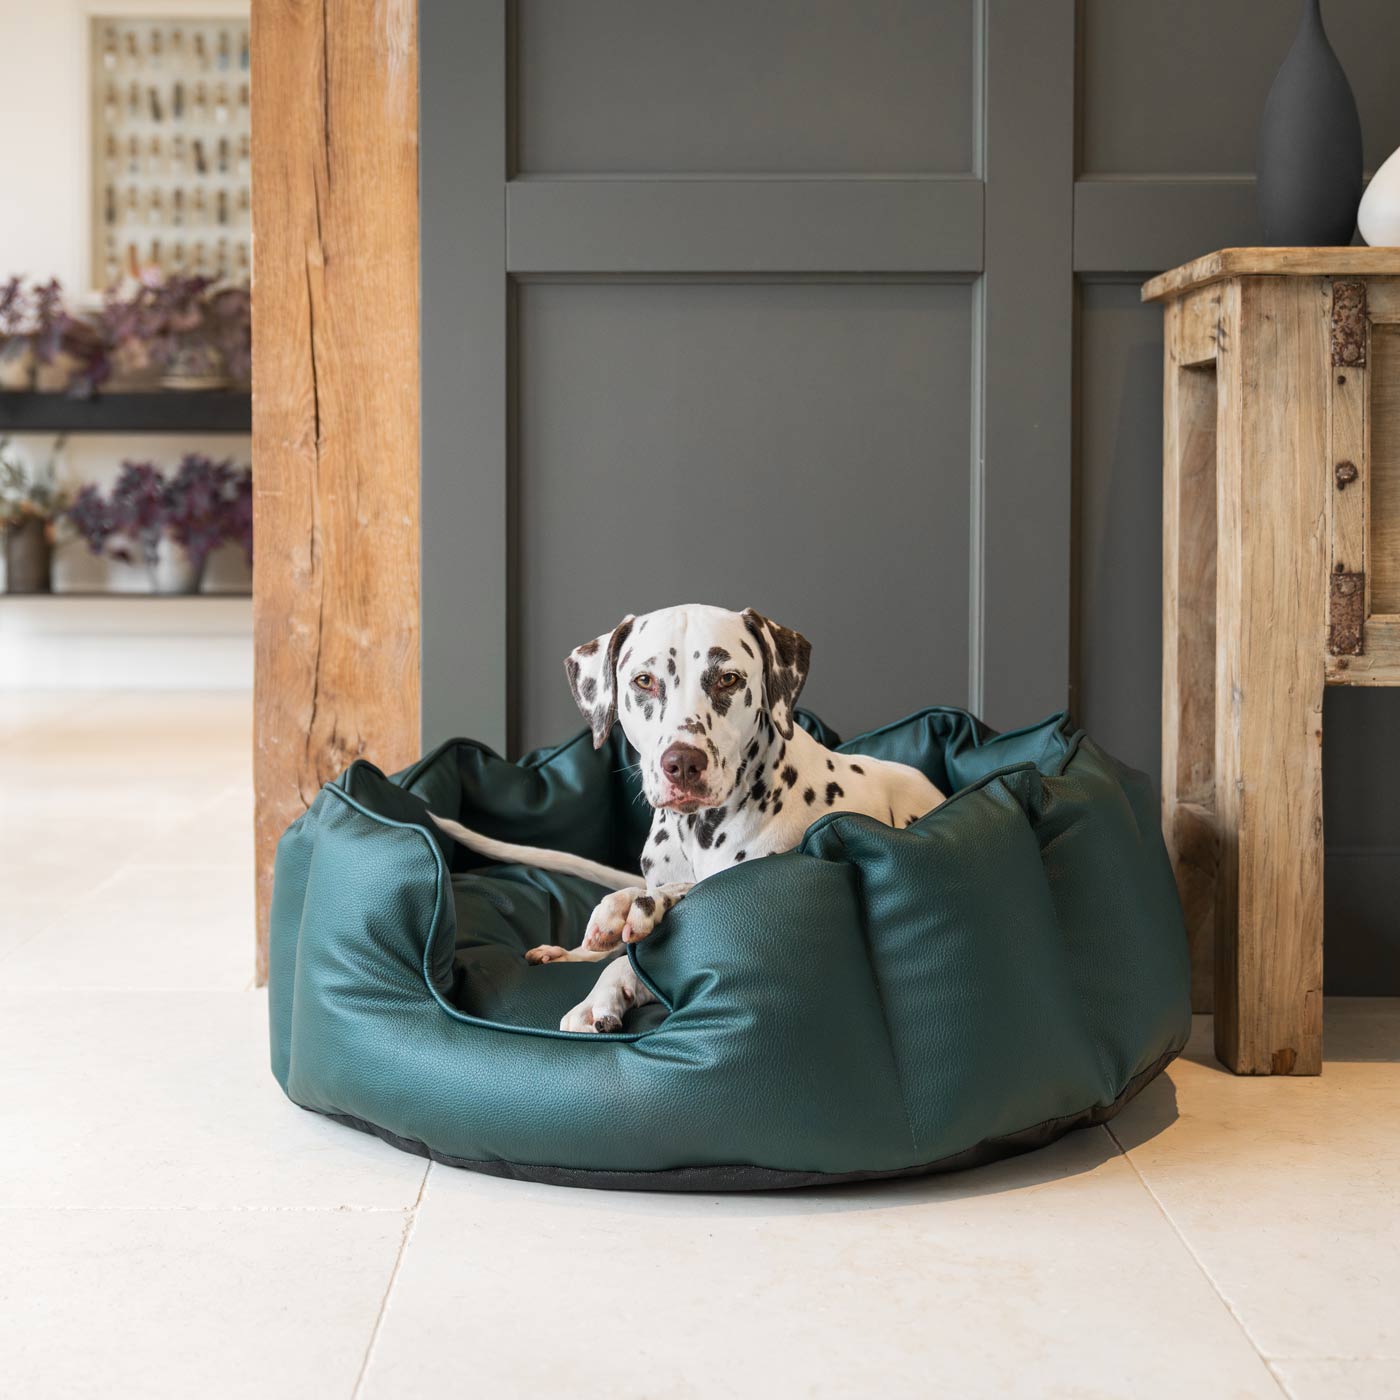 Luxury Handmade High Wall in Rhino Tough Faux Leather, in Forest Green, Perfect For Your Pets Nap Time! Available To Personalise at Lords & Labradors